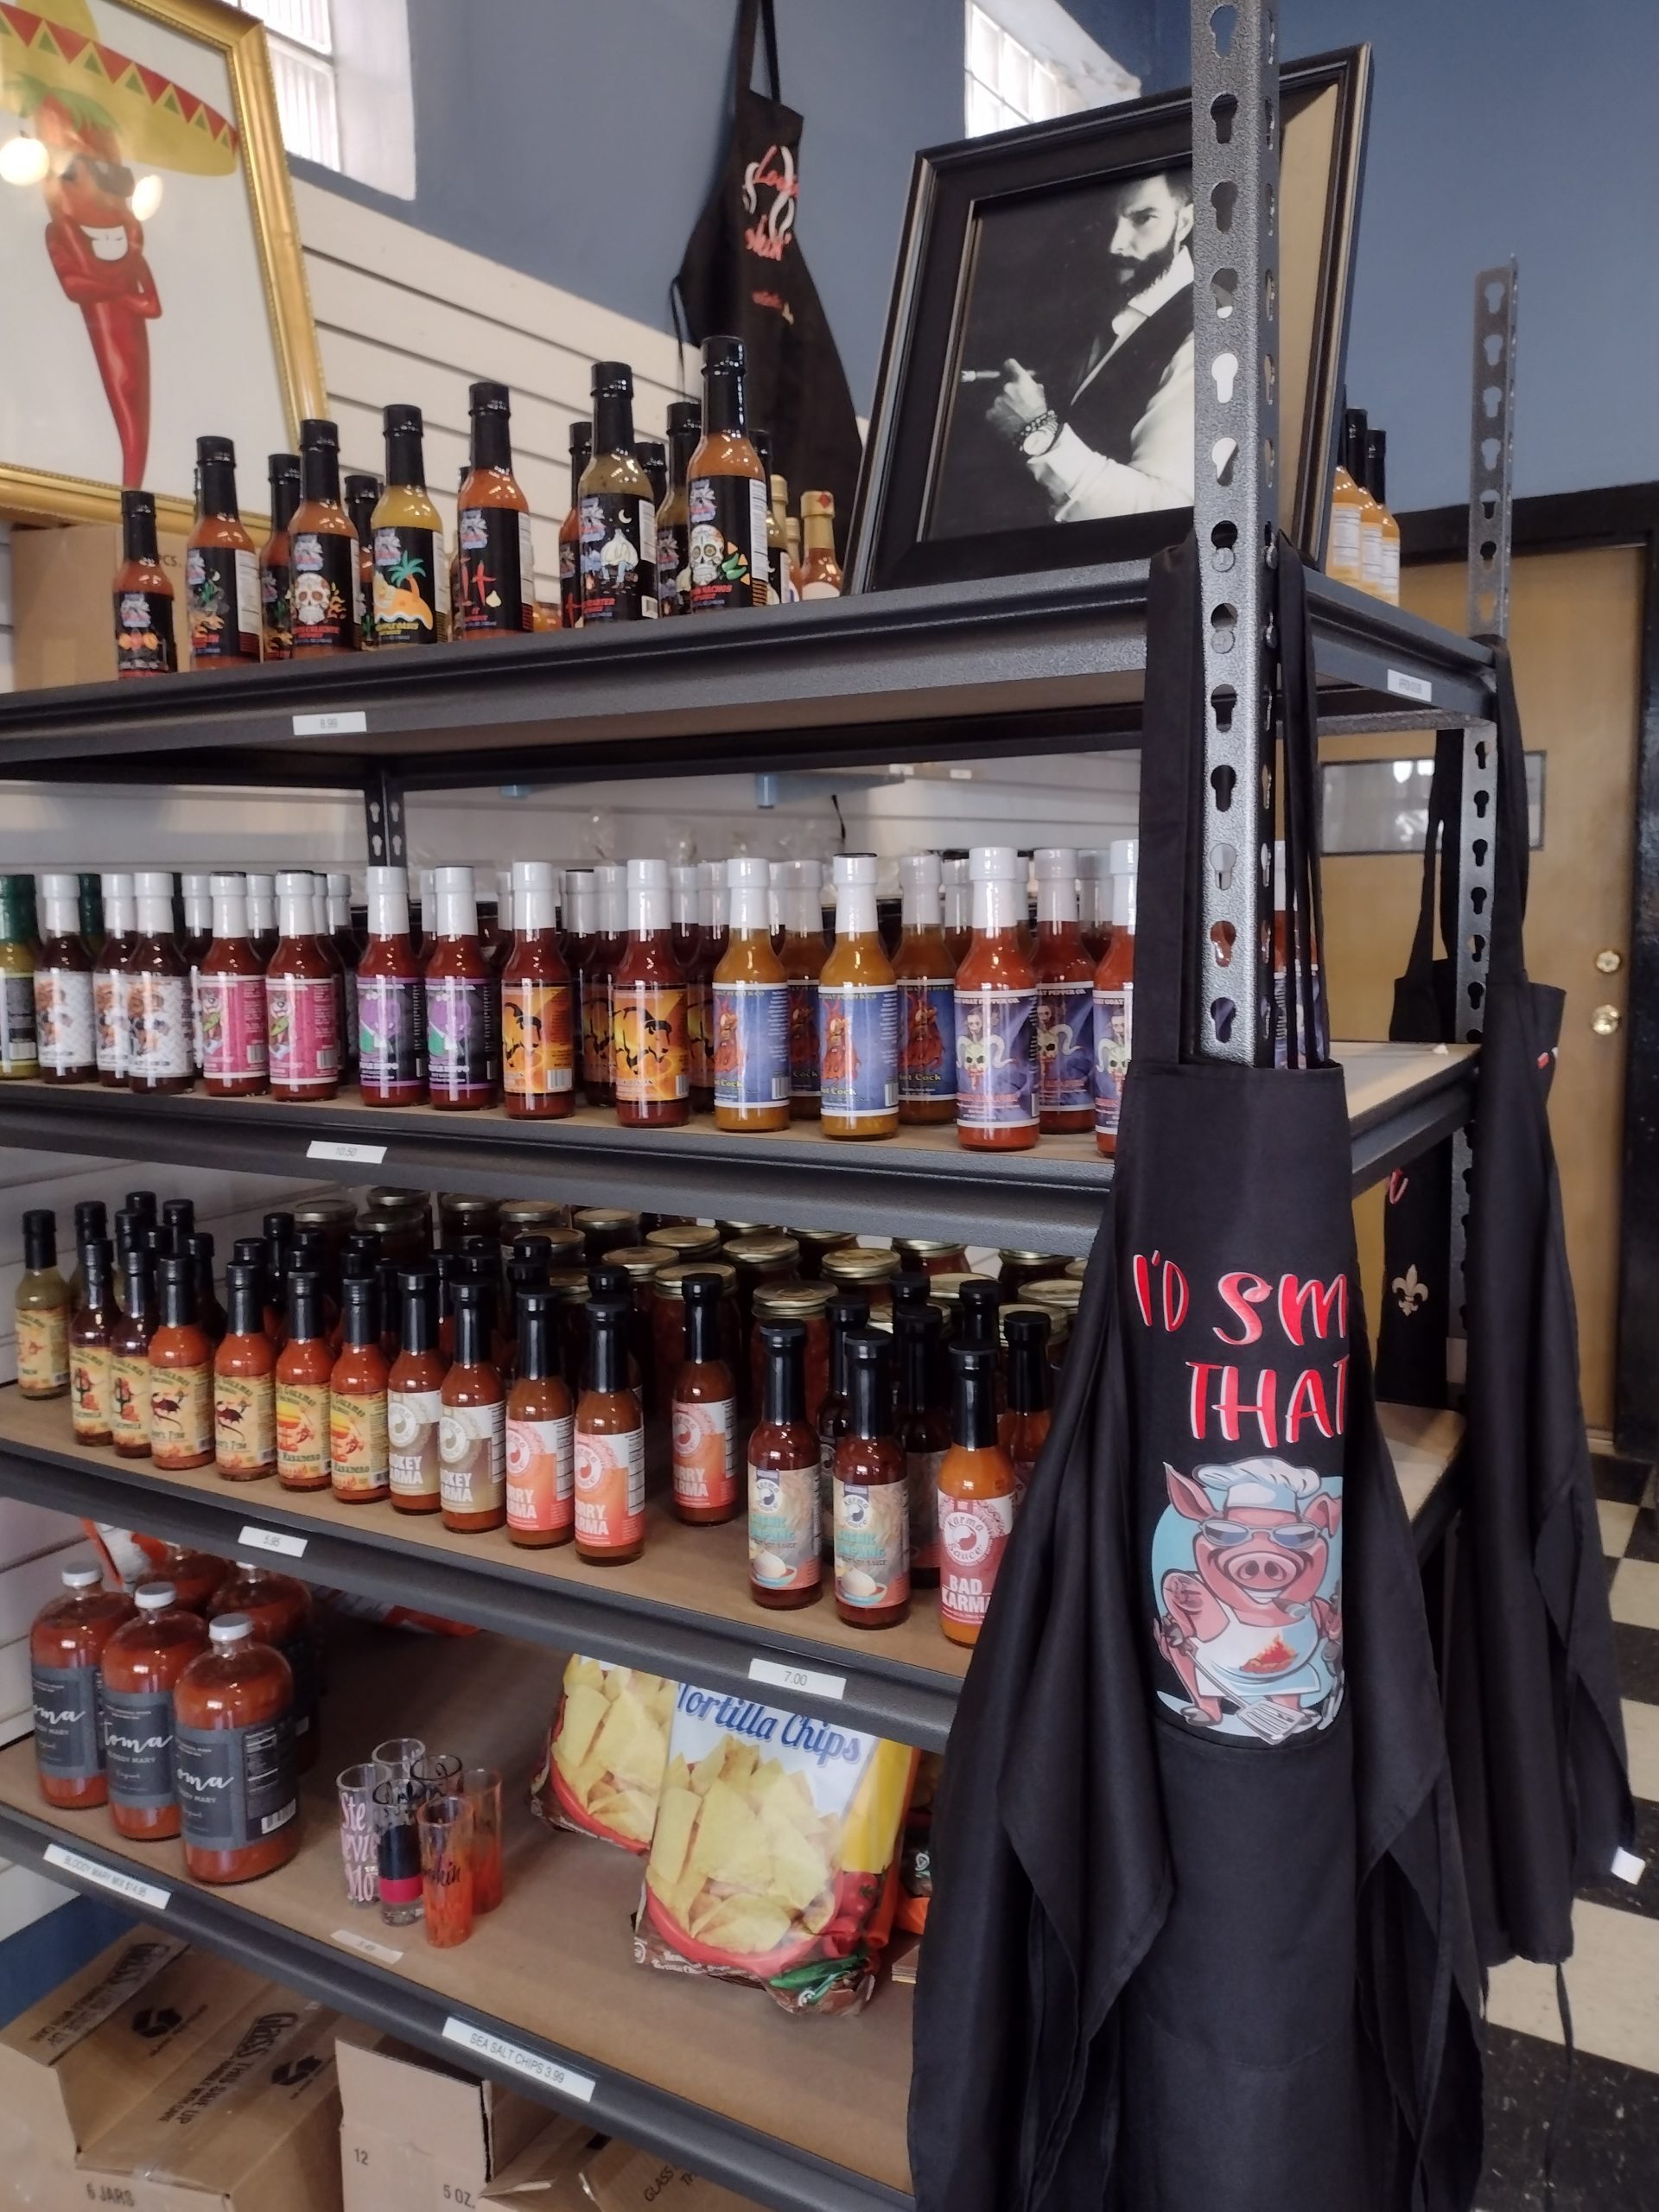 Hot sauces, BBQ sauces and a variety of sauces and mustards.